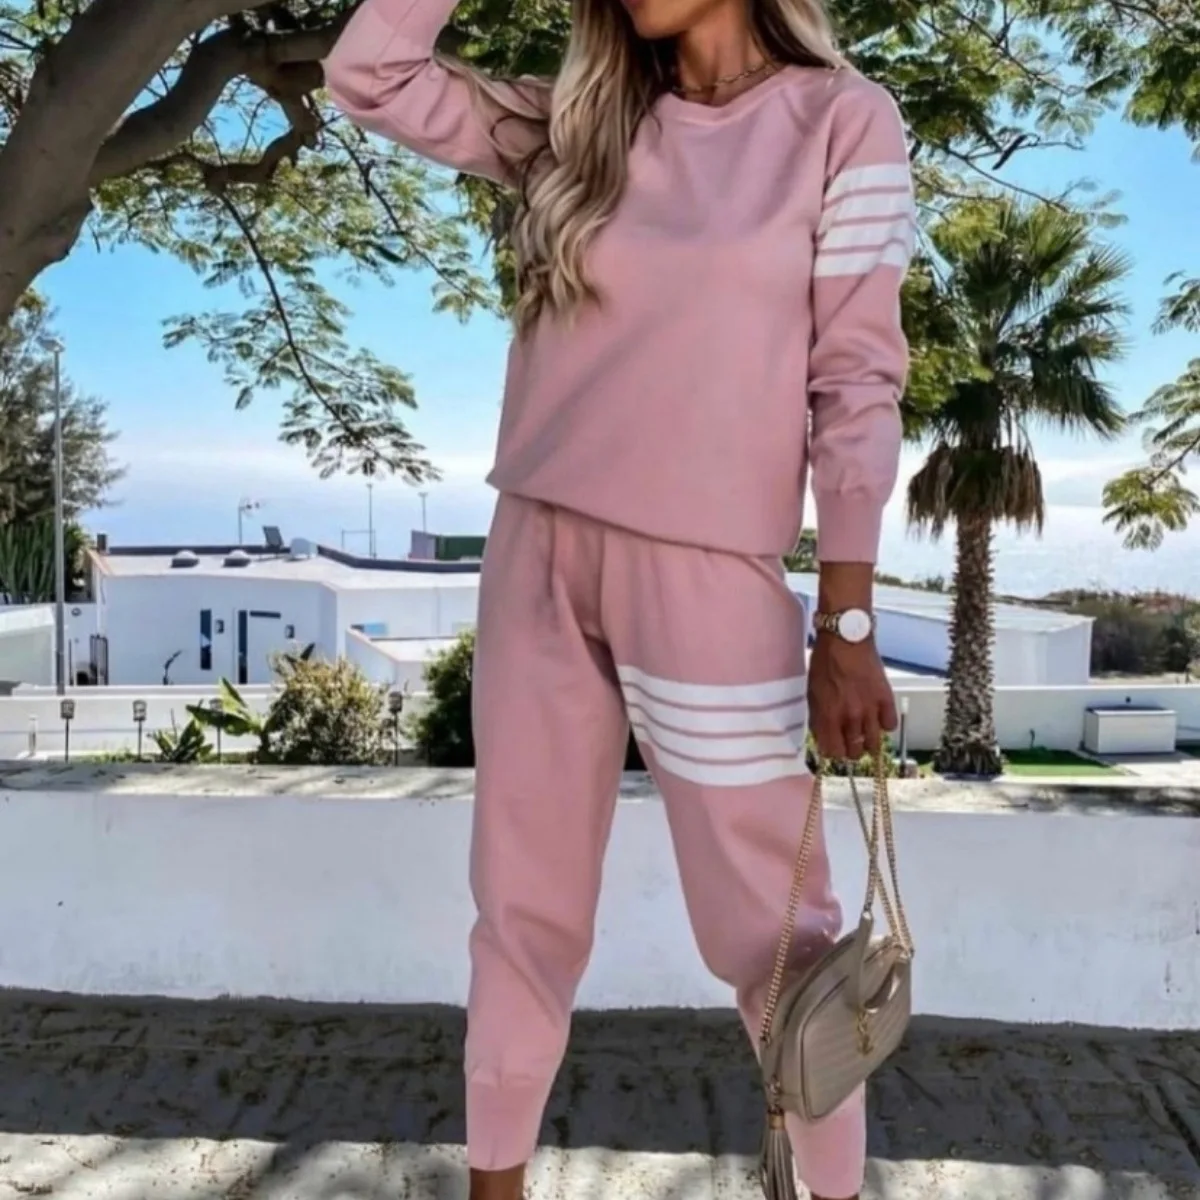 

2 Pcs/Set Women's Casual Tracksuit O-neck Sweatshirts and Jogger Pants Sportive Sweatsuits 2021AW Pullovers Female Clothing